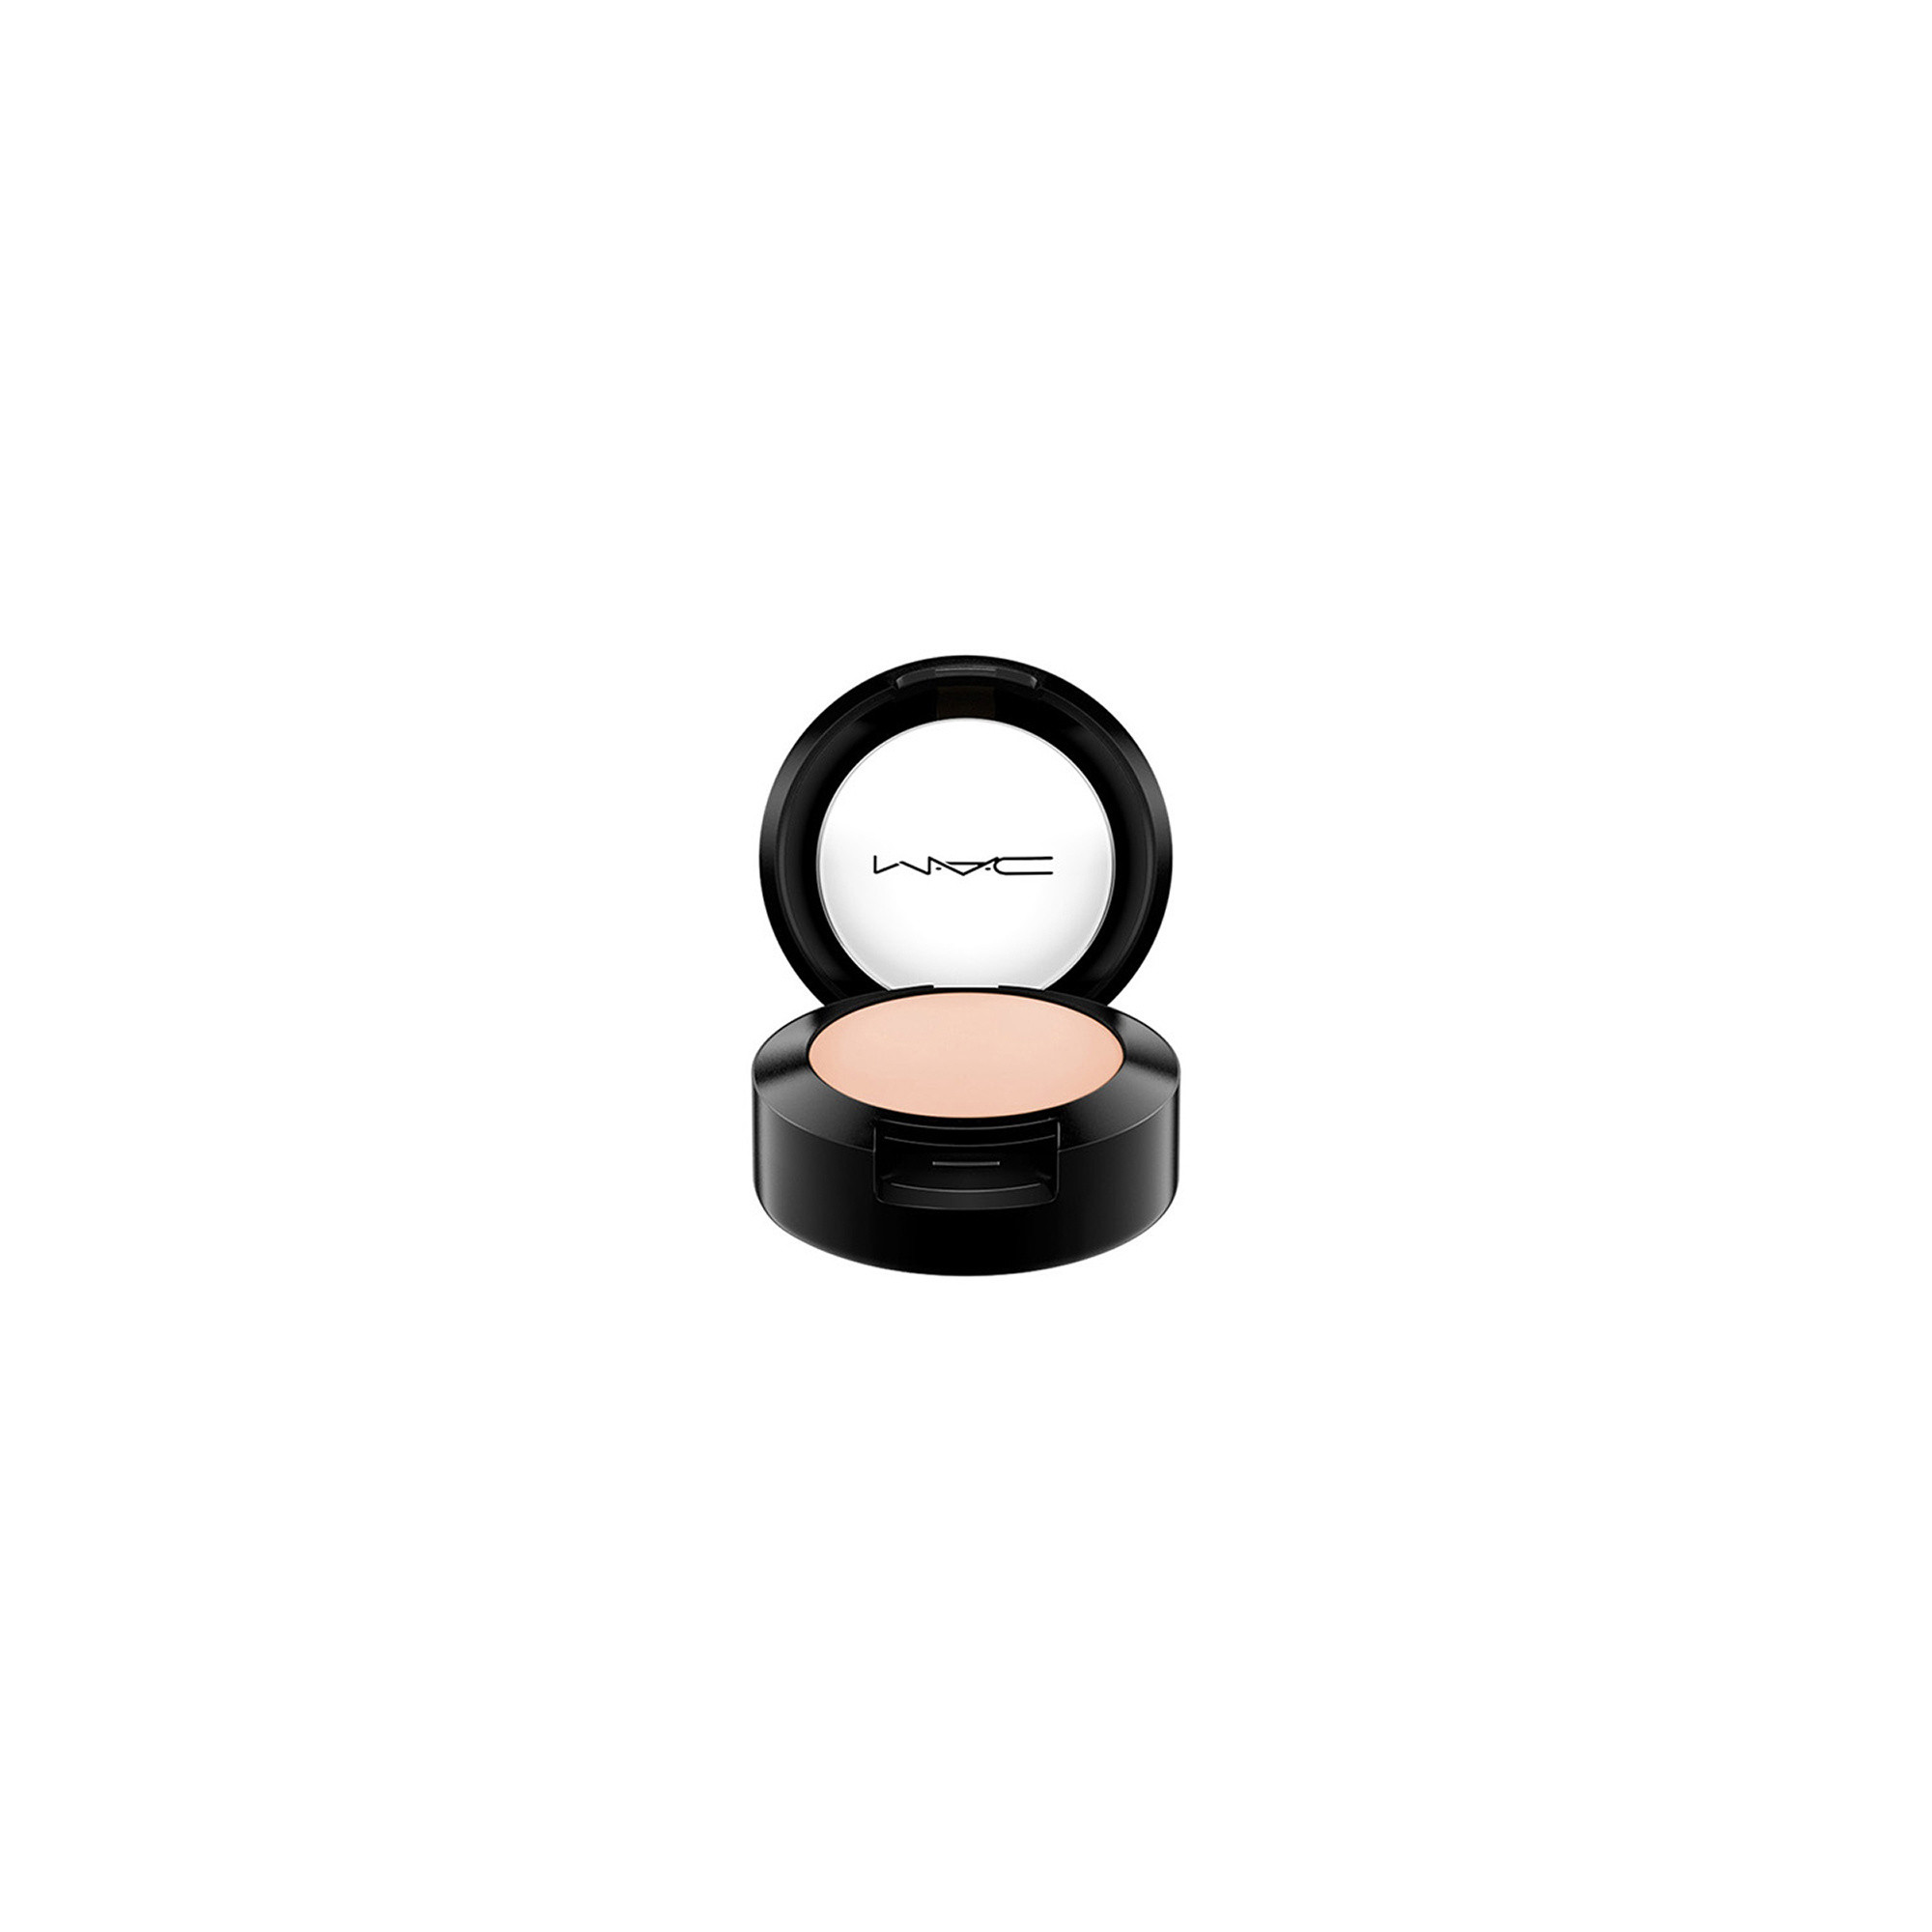 Studio Finish Concealer - NW20, NW20, large image number 1